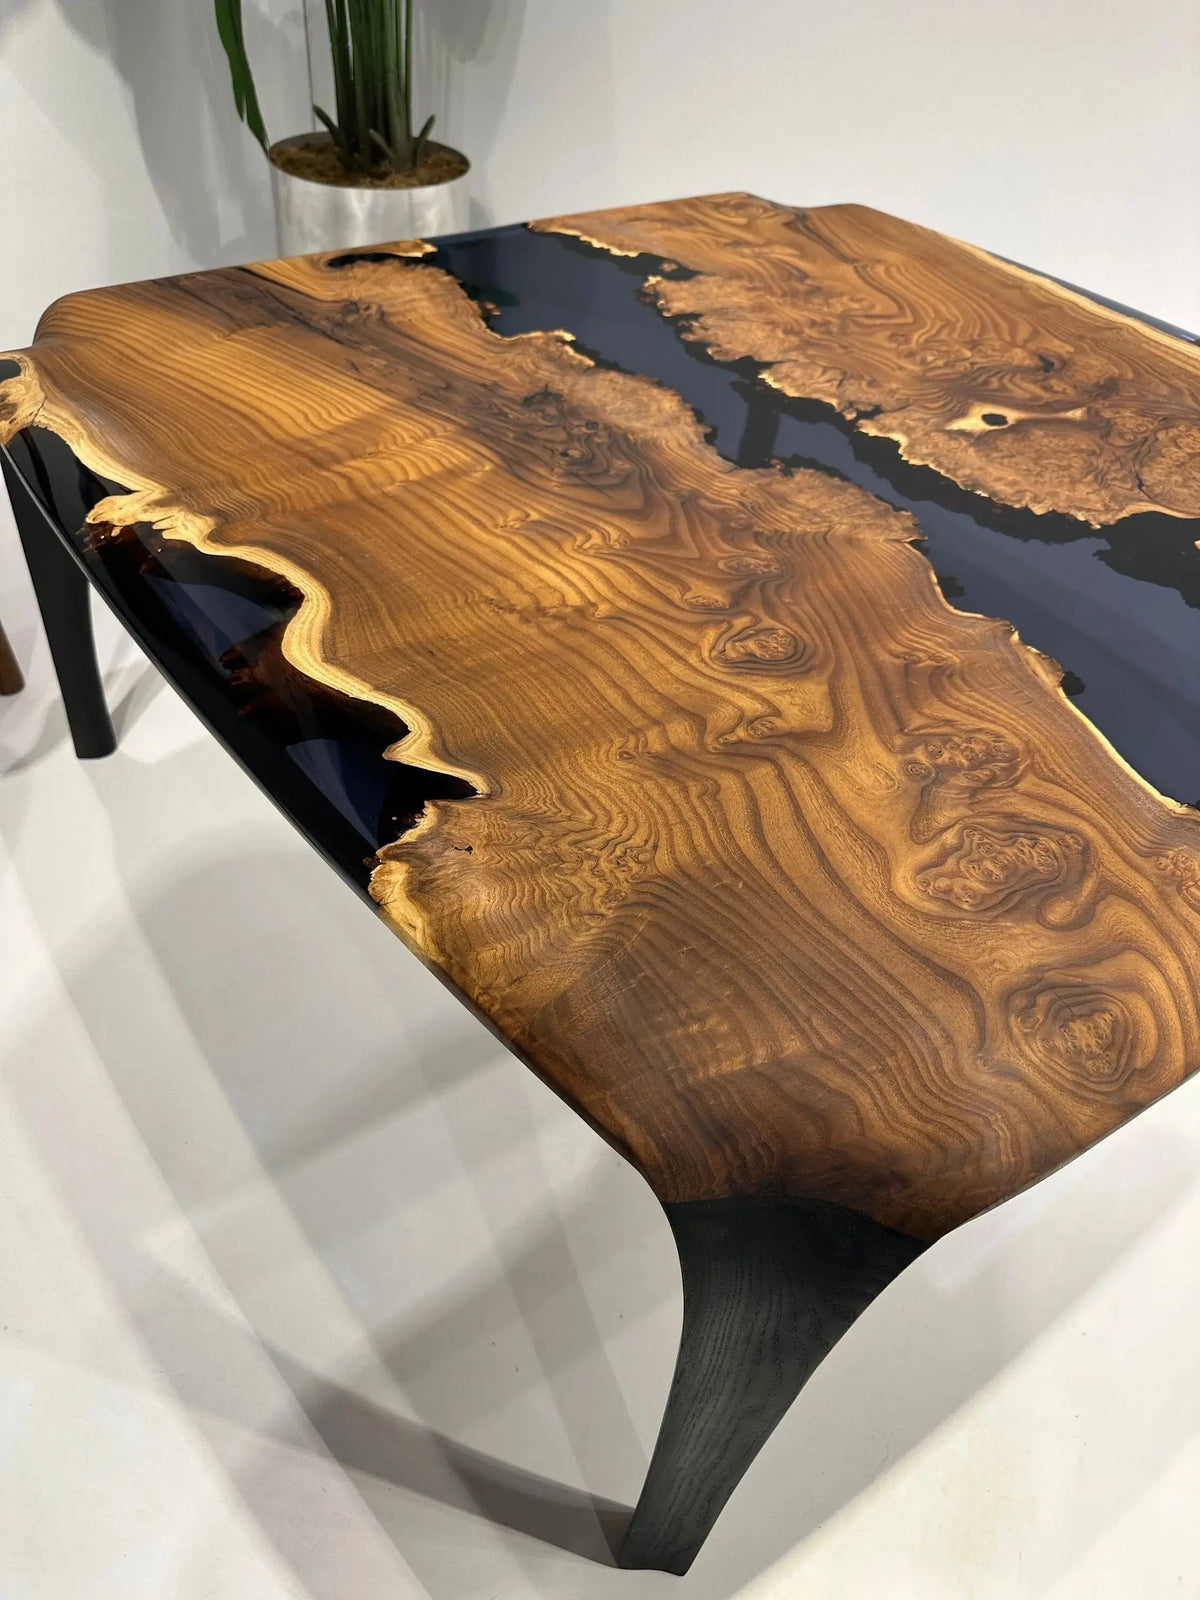 Epoxy River Middle Table | Living Room Coffee Table | Home Decor Table